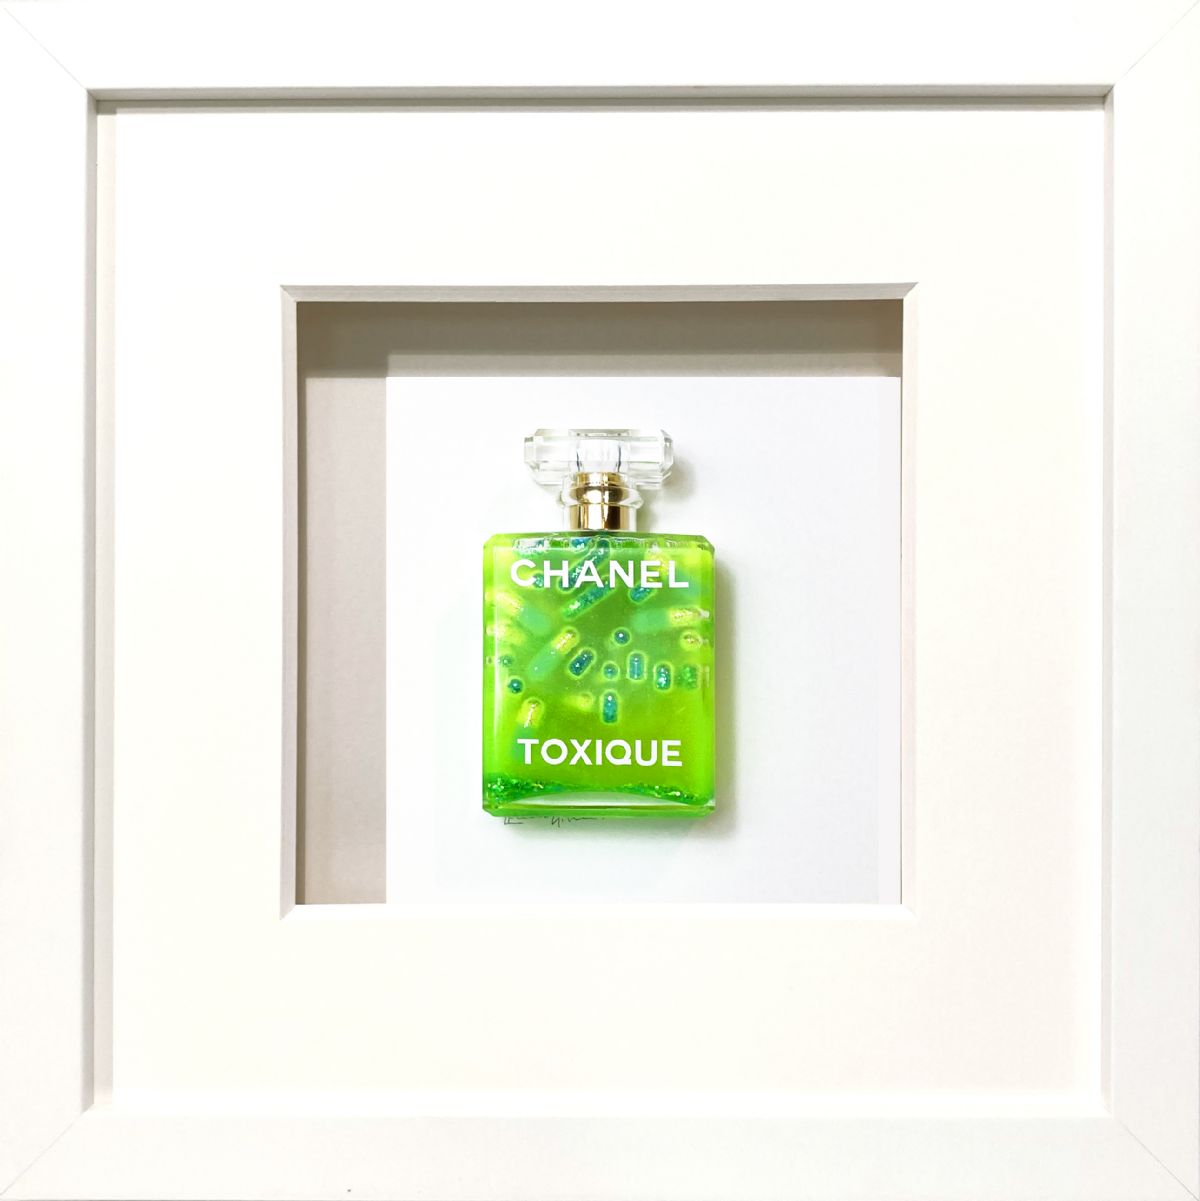 Toxic Chanel Vert by Emma Gibbons